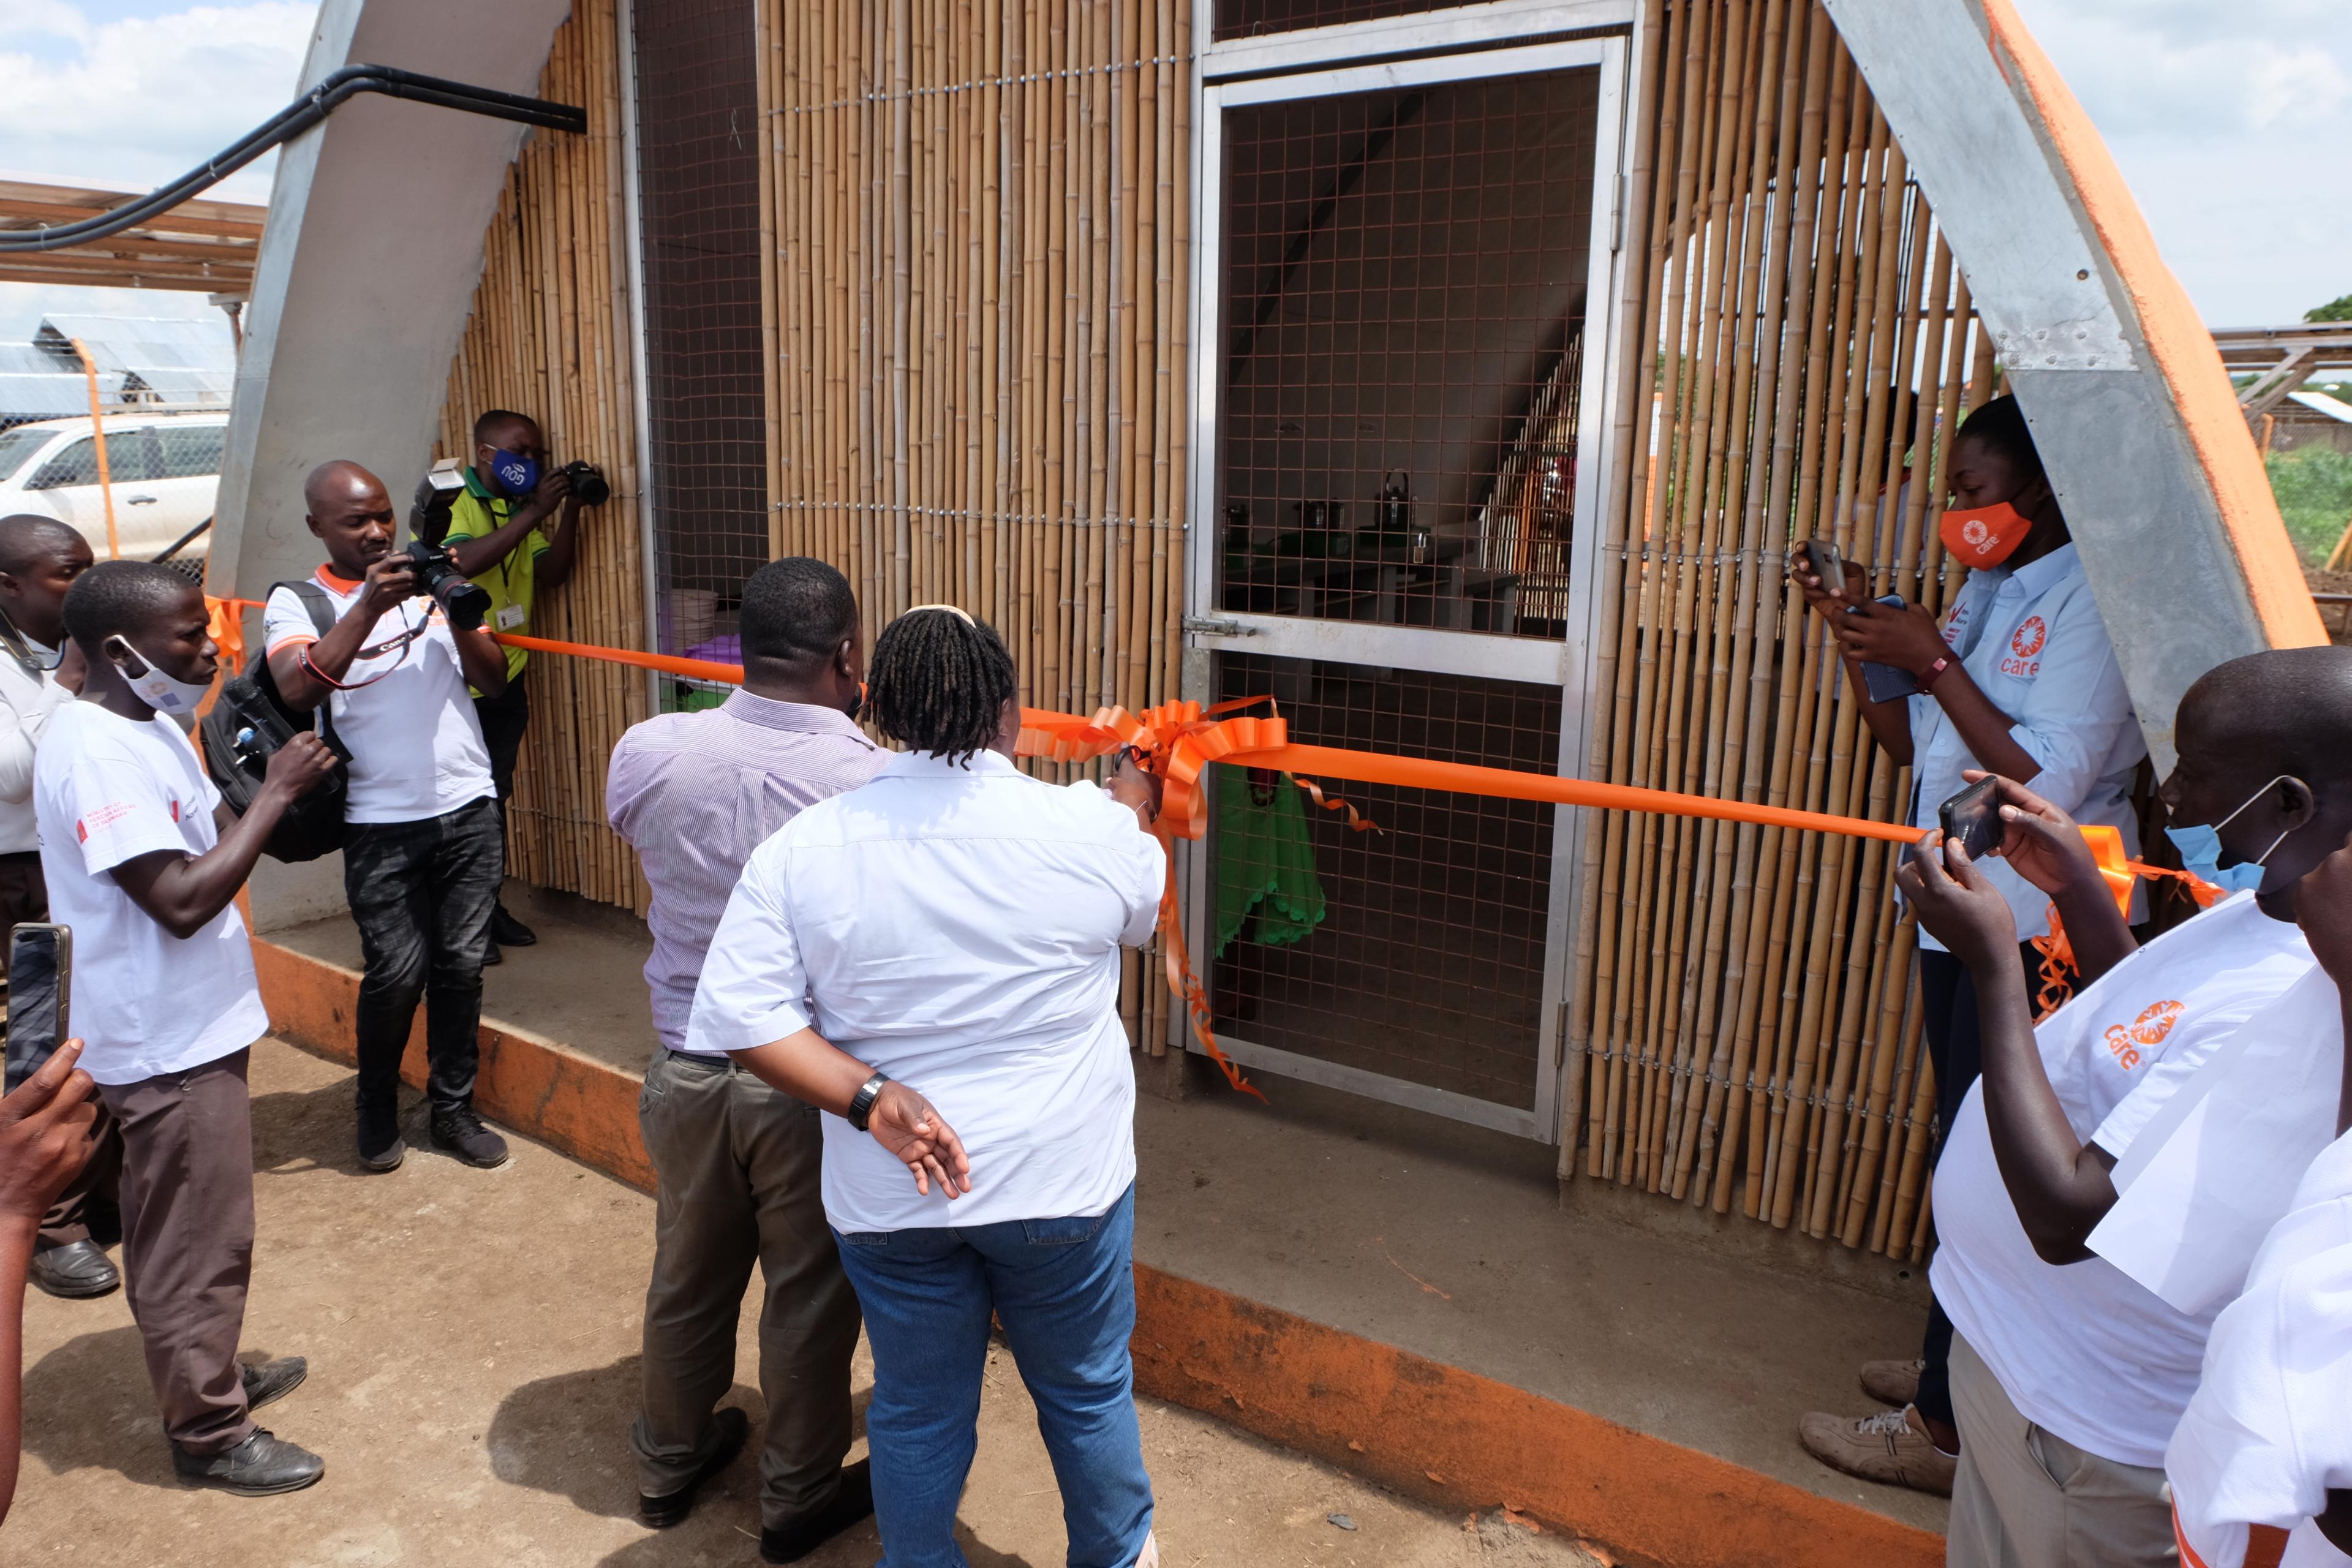 Sustainable refugee camp on its opening day